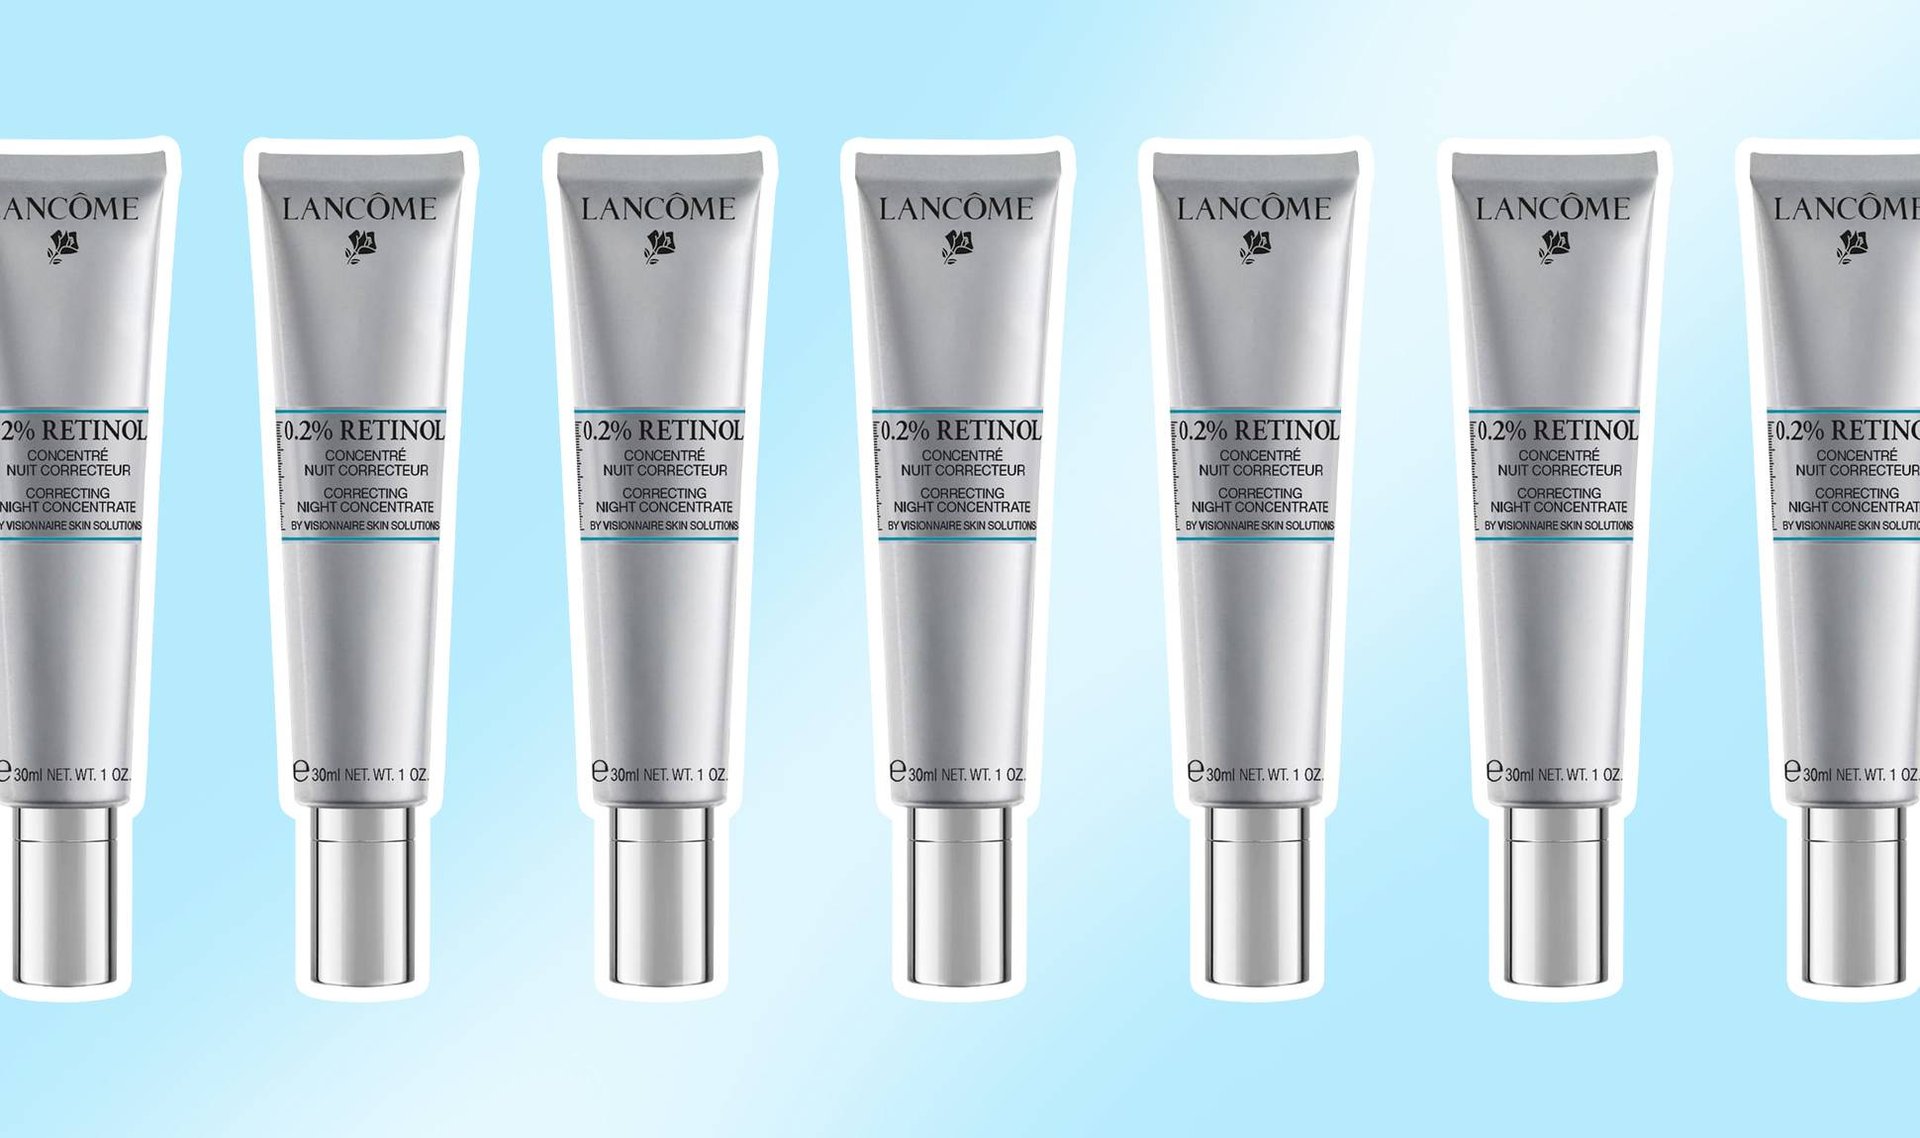 The Benefits of Using the Lancôme Visionnaire Skin Solutions 0.2% Retinol Night Concentrate